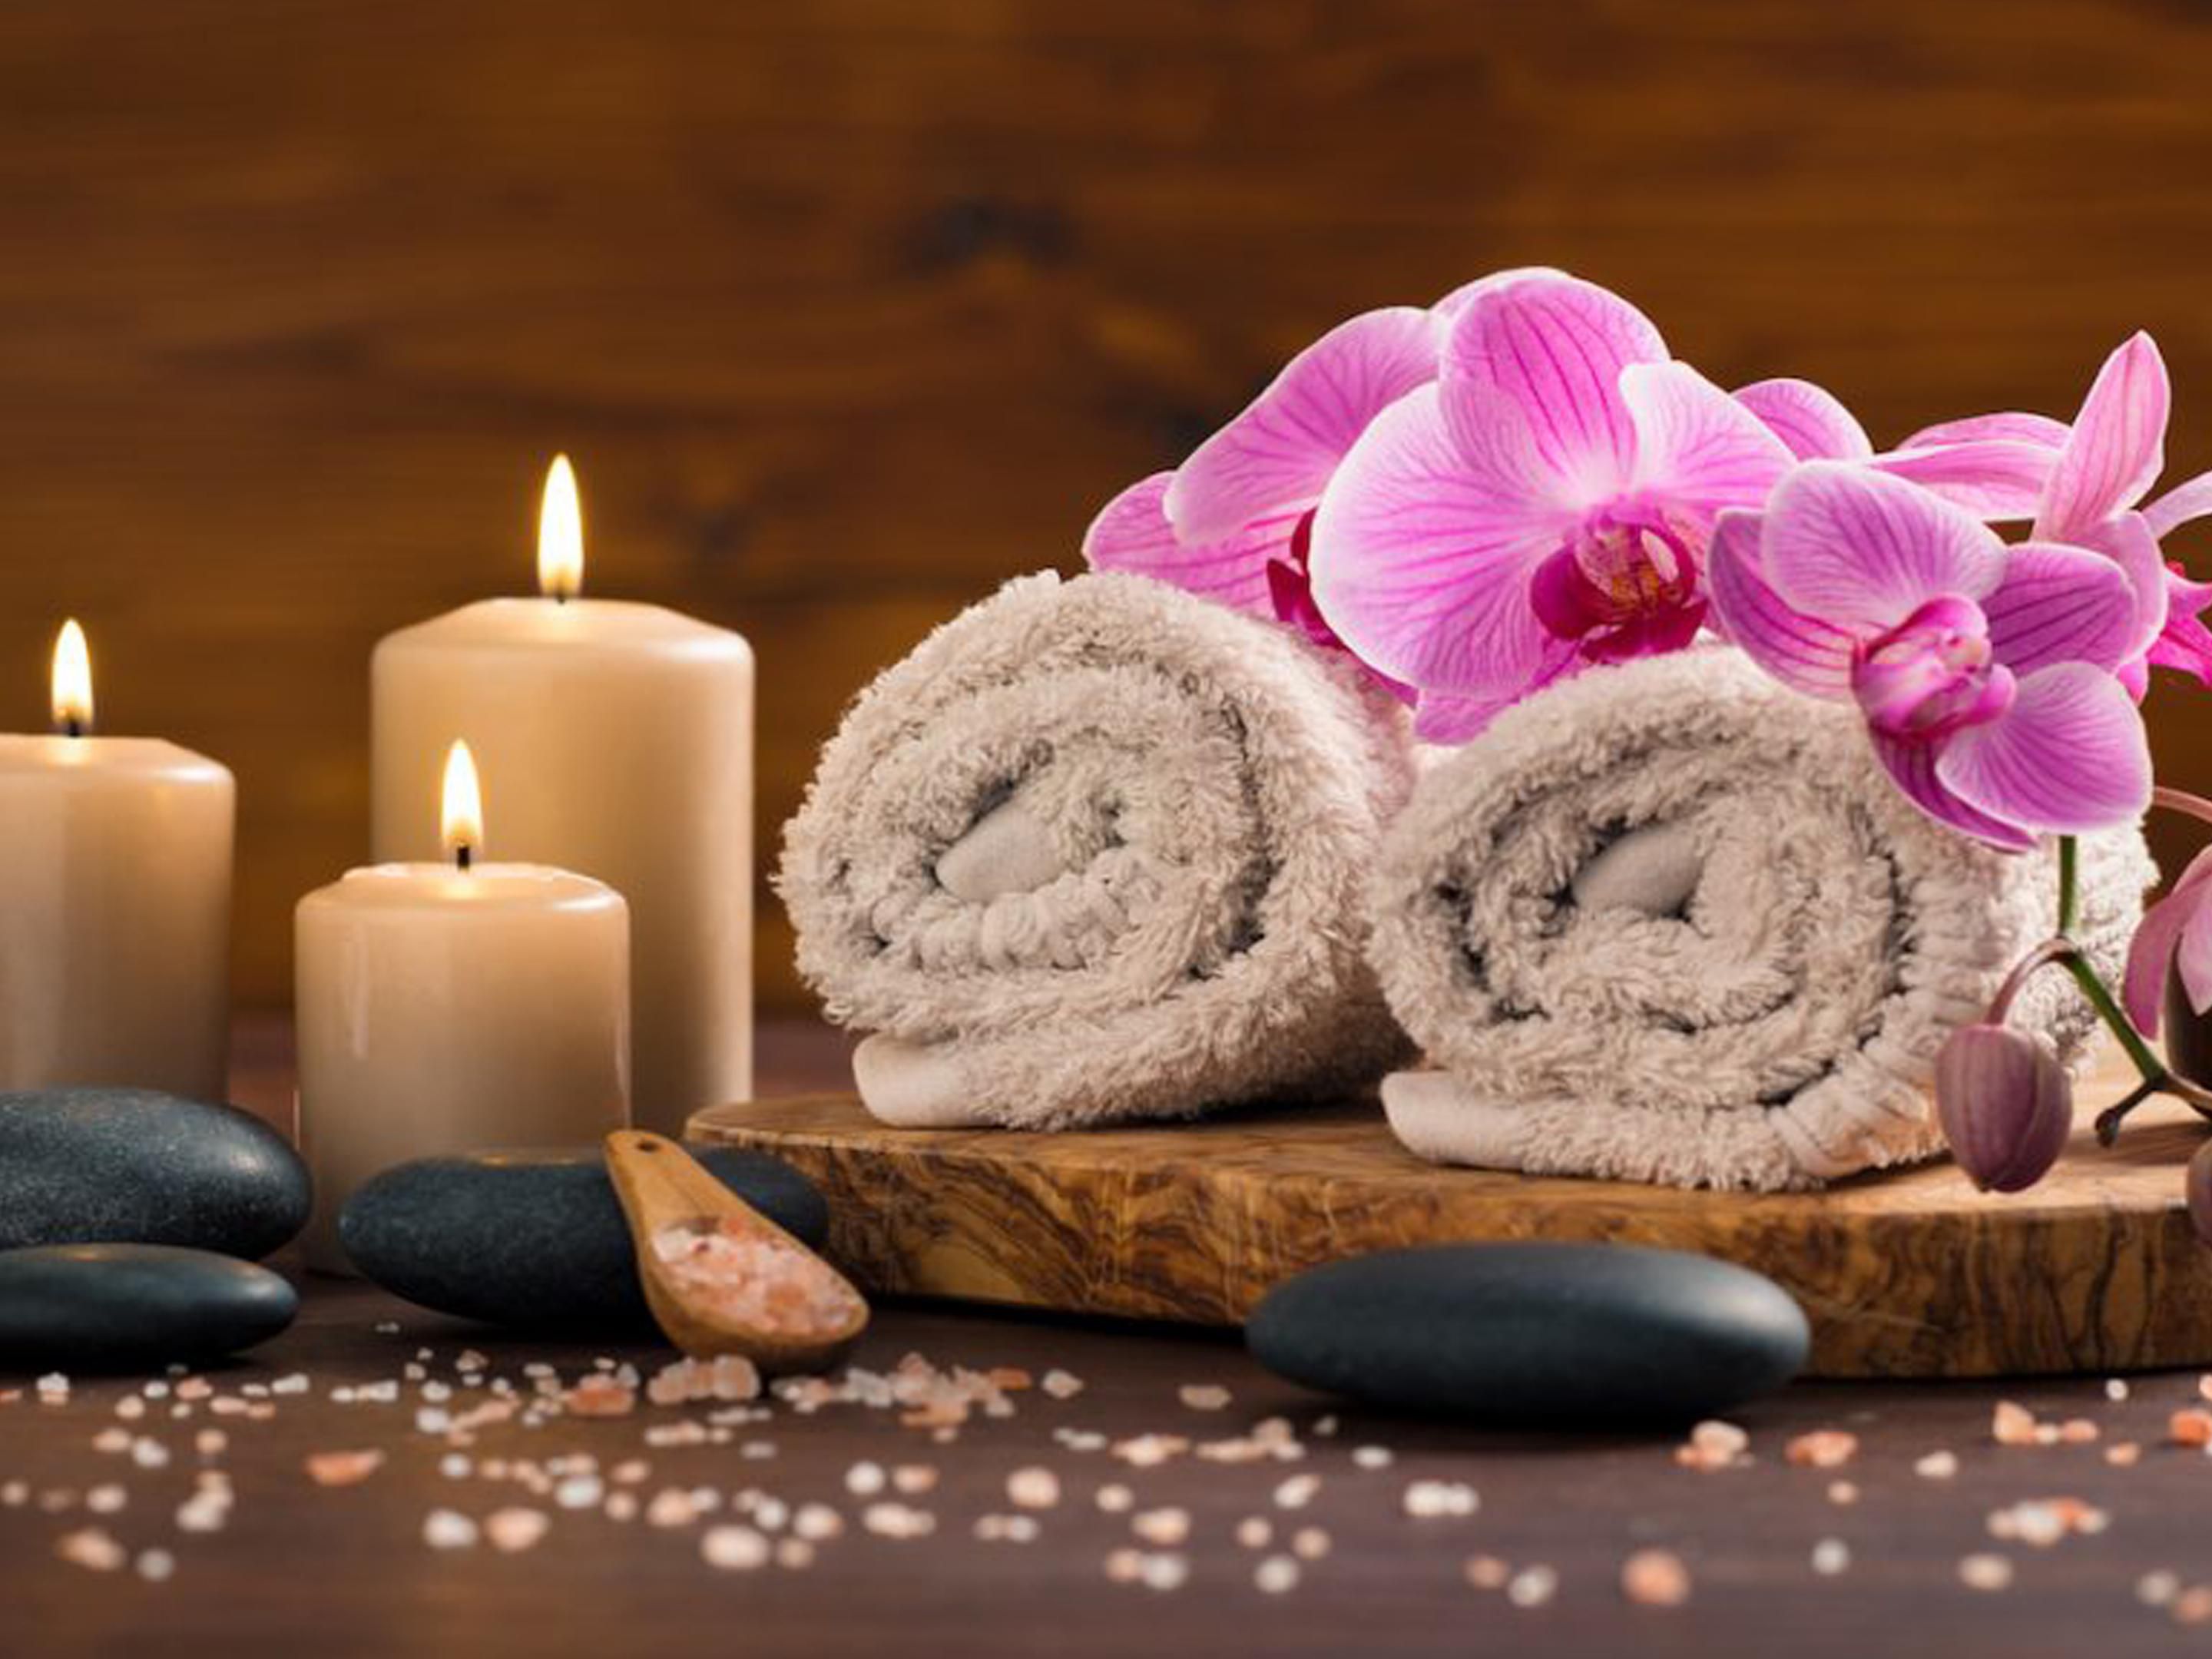 The Award winning SPA is now open at Holiday Inn Cochin. Plan to come and pamper yourself with Body Therapies, Facials, Body Scrubs, Body Wraps, Ayurveda & many Spa packages to activate your senses. The relaxing and rejuvenating experience will help you feel refreshed. Cross massages and experienced specialist will enhance your experience.